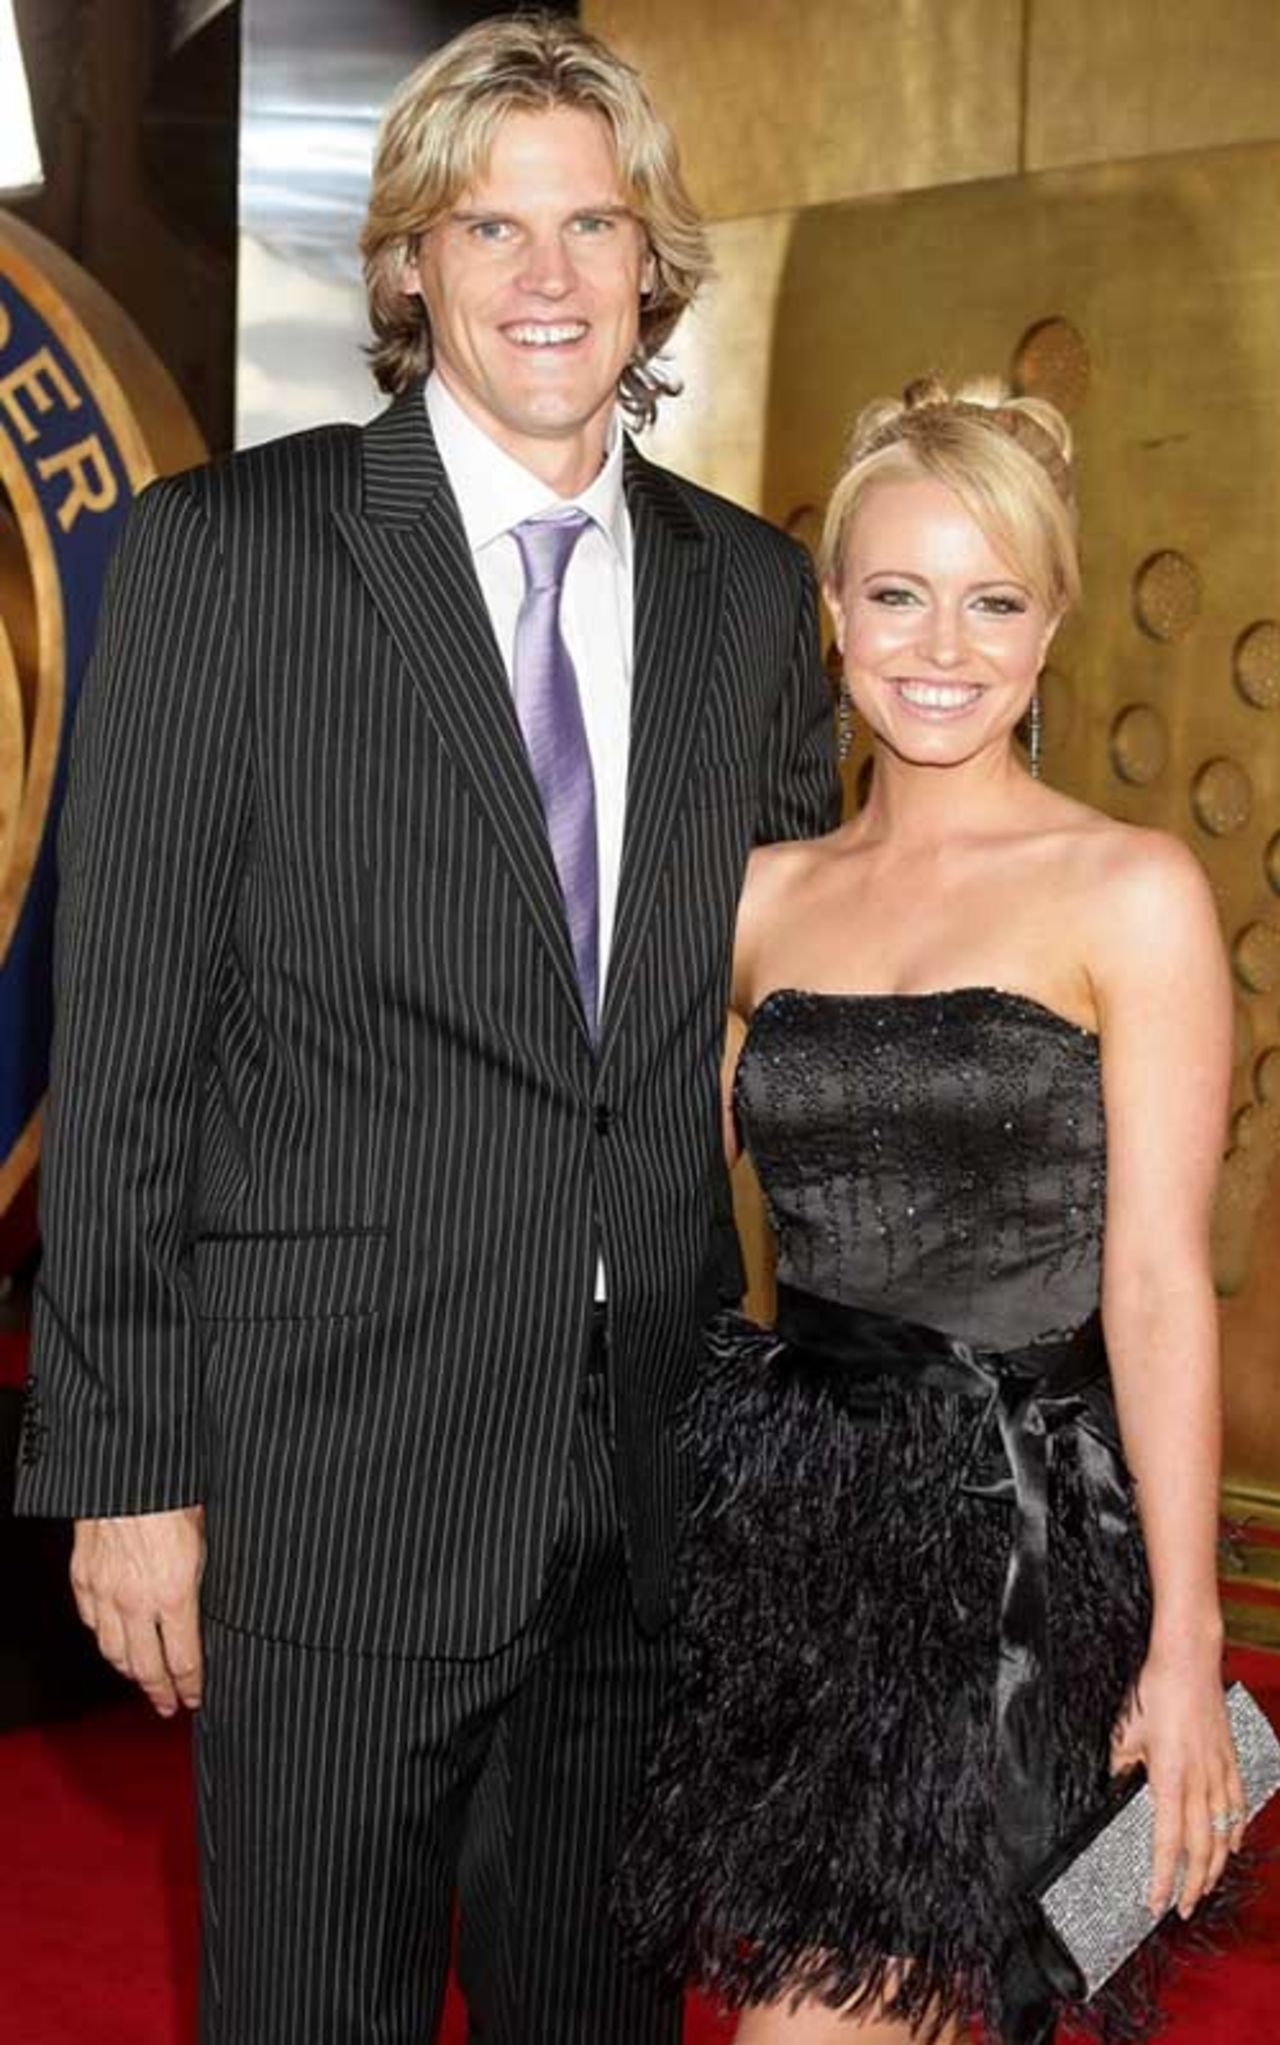 Nathan Bracken and partner Haley are all smiles at the 2009 Allan Border Medal, Melbourne, February 3, 2009